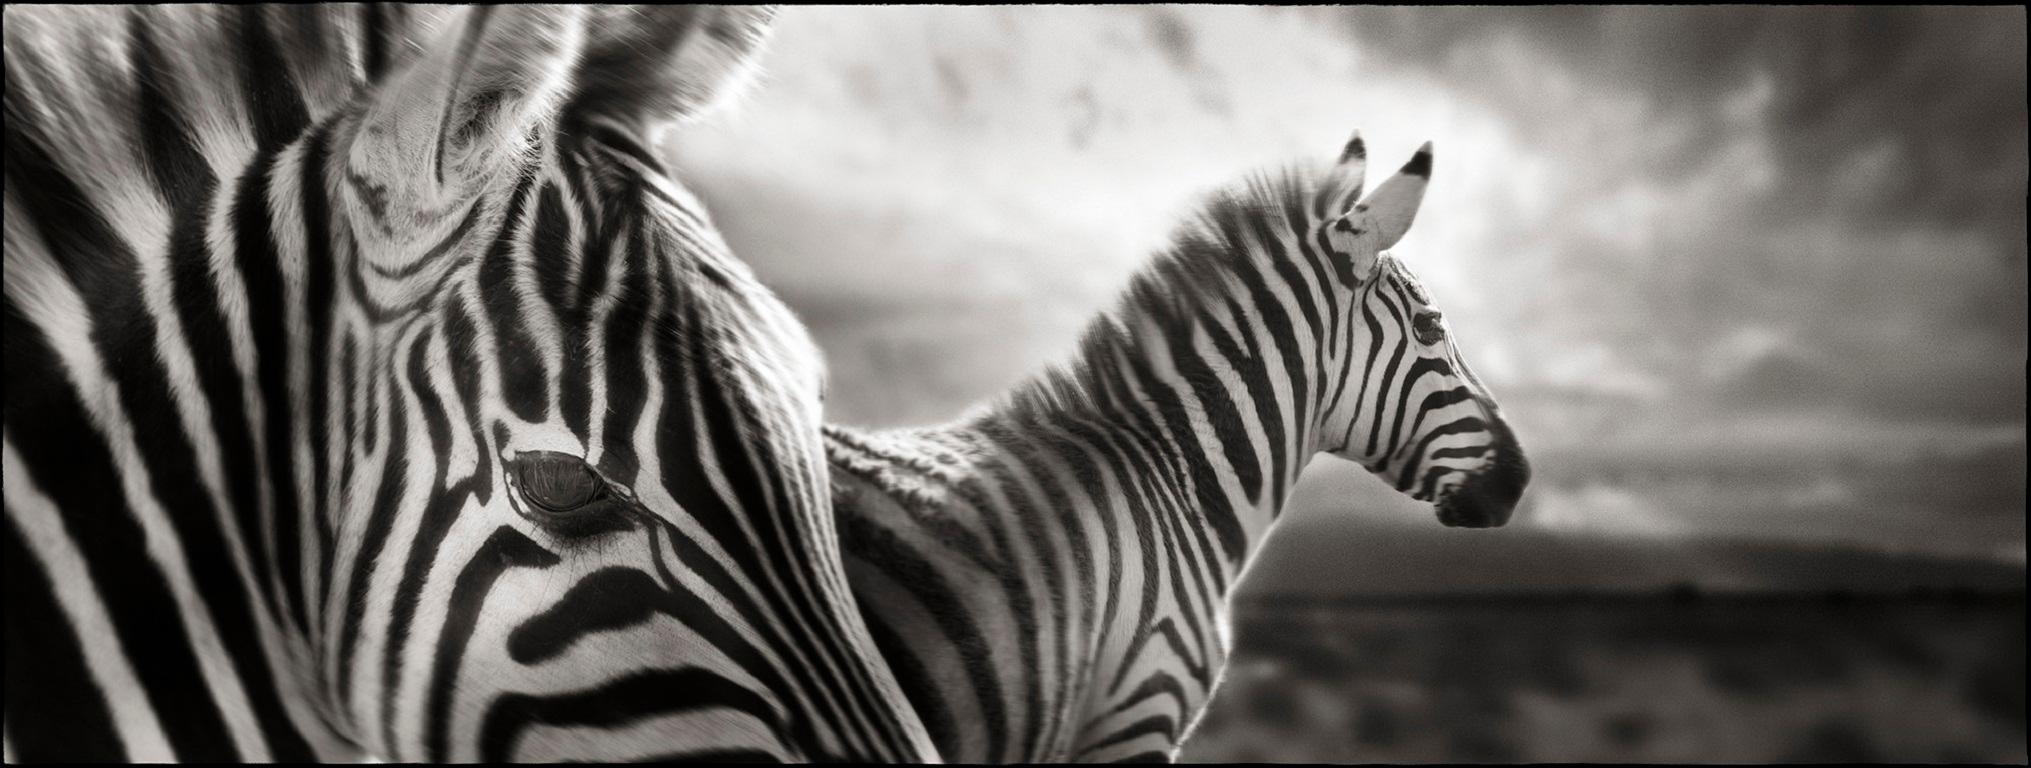 Zebra Duo - Close-Up fine art photography of two zebras in landscape, wildlife